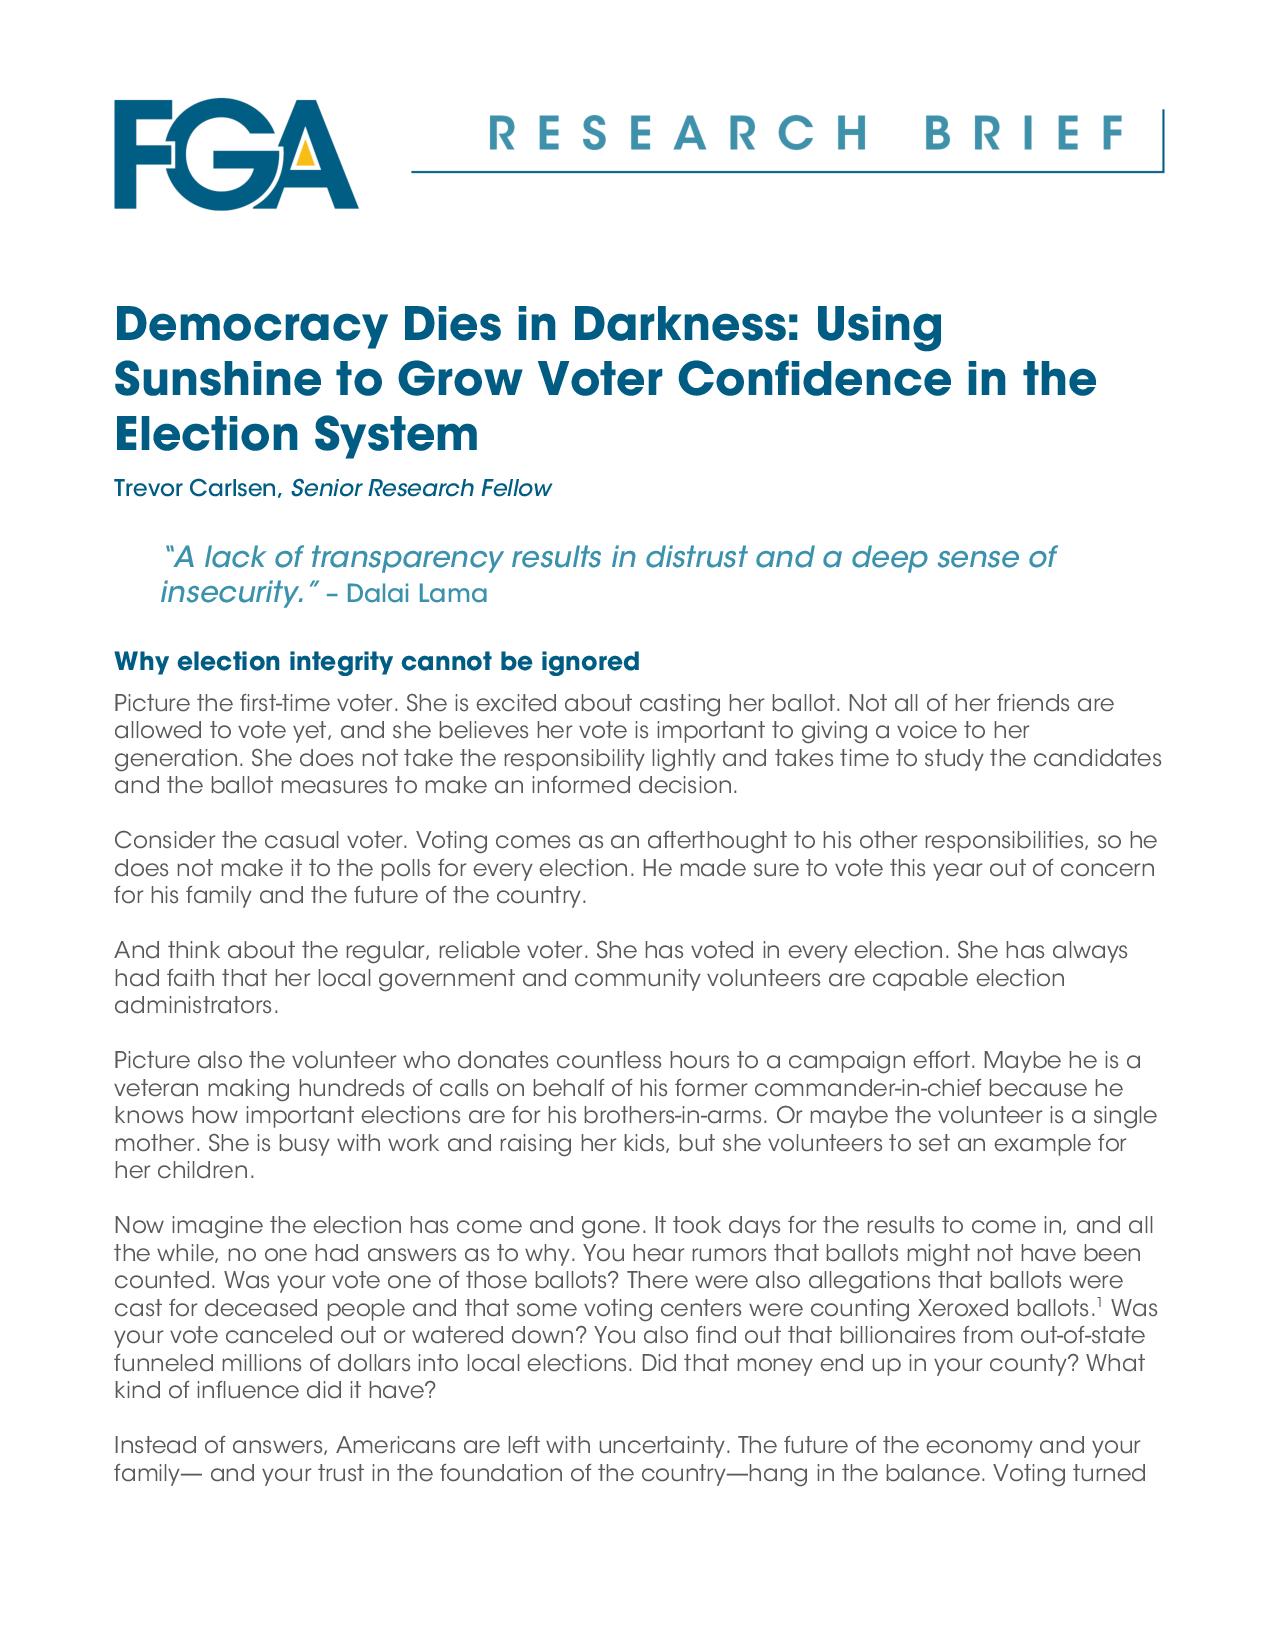 Democracy Dies in Darkness: Using Sunshine to Grow Voter Confidence in the Election System